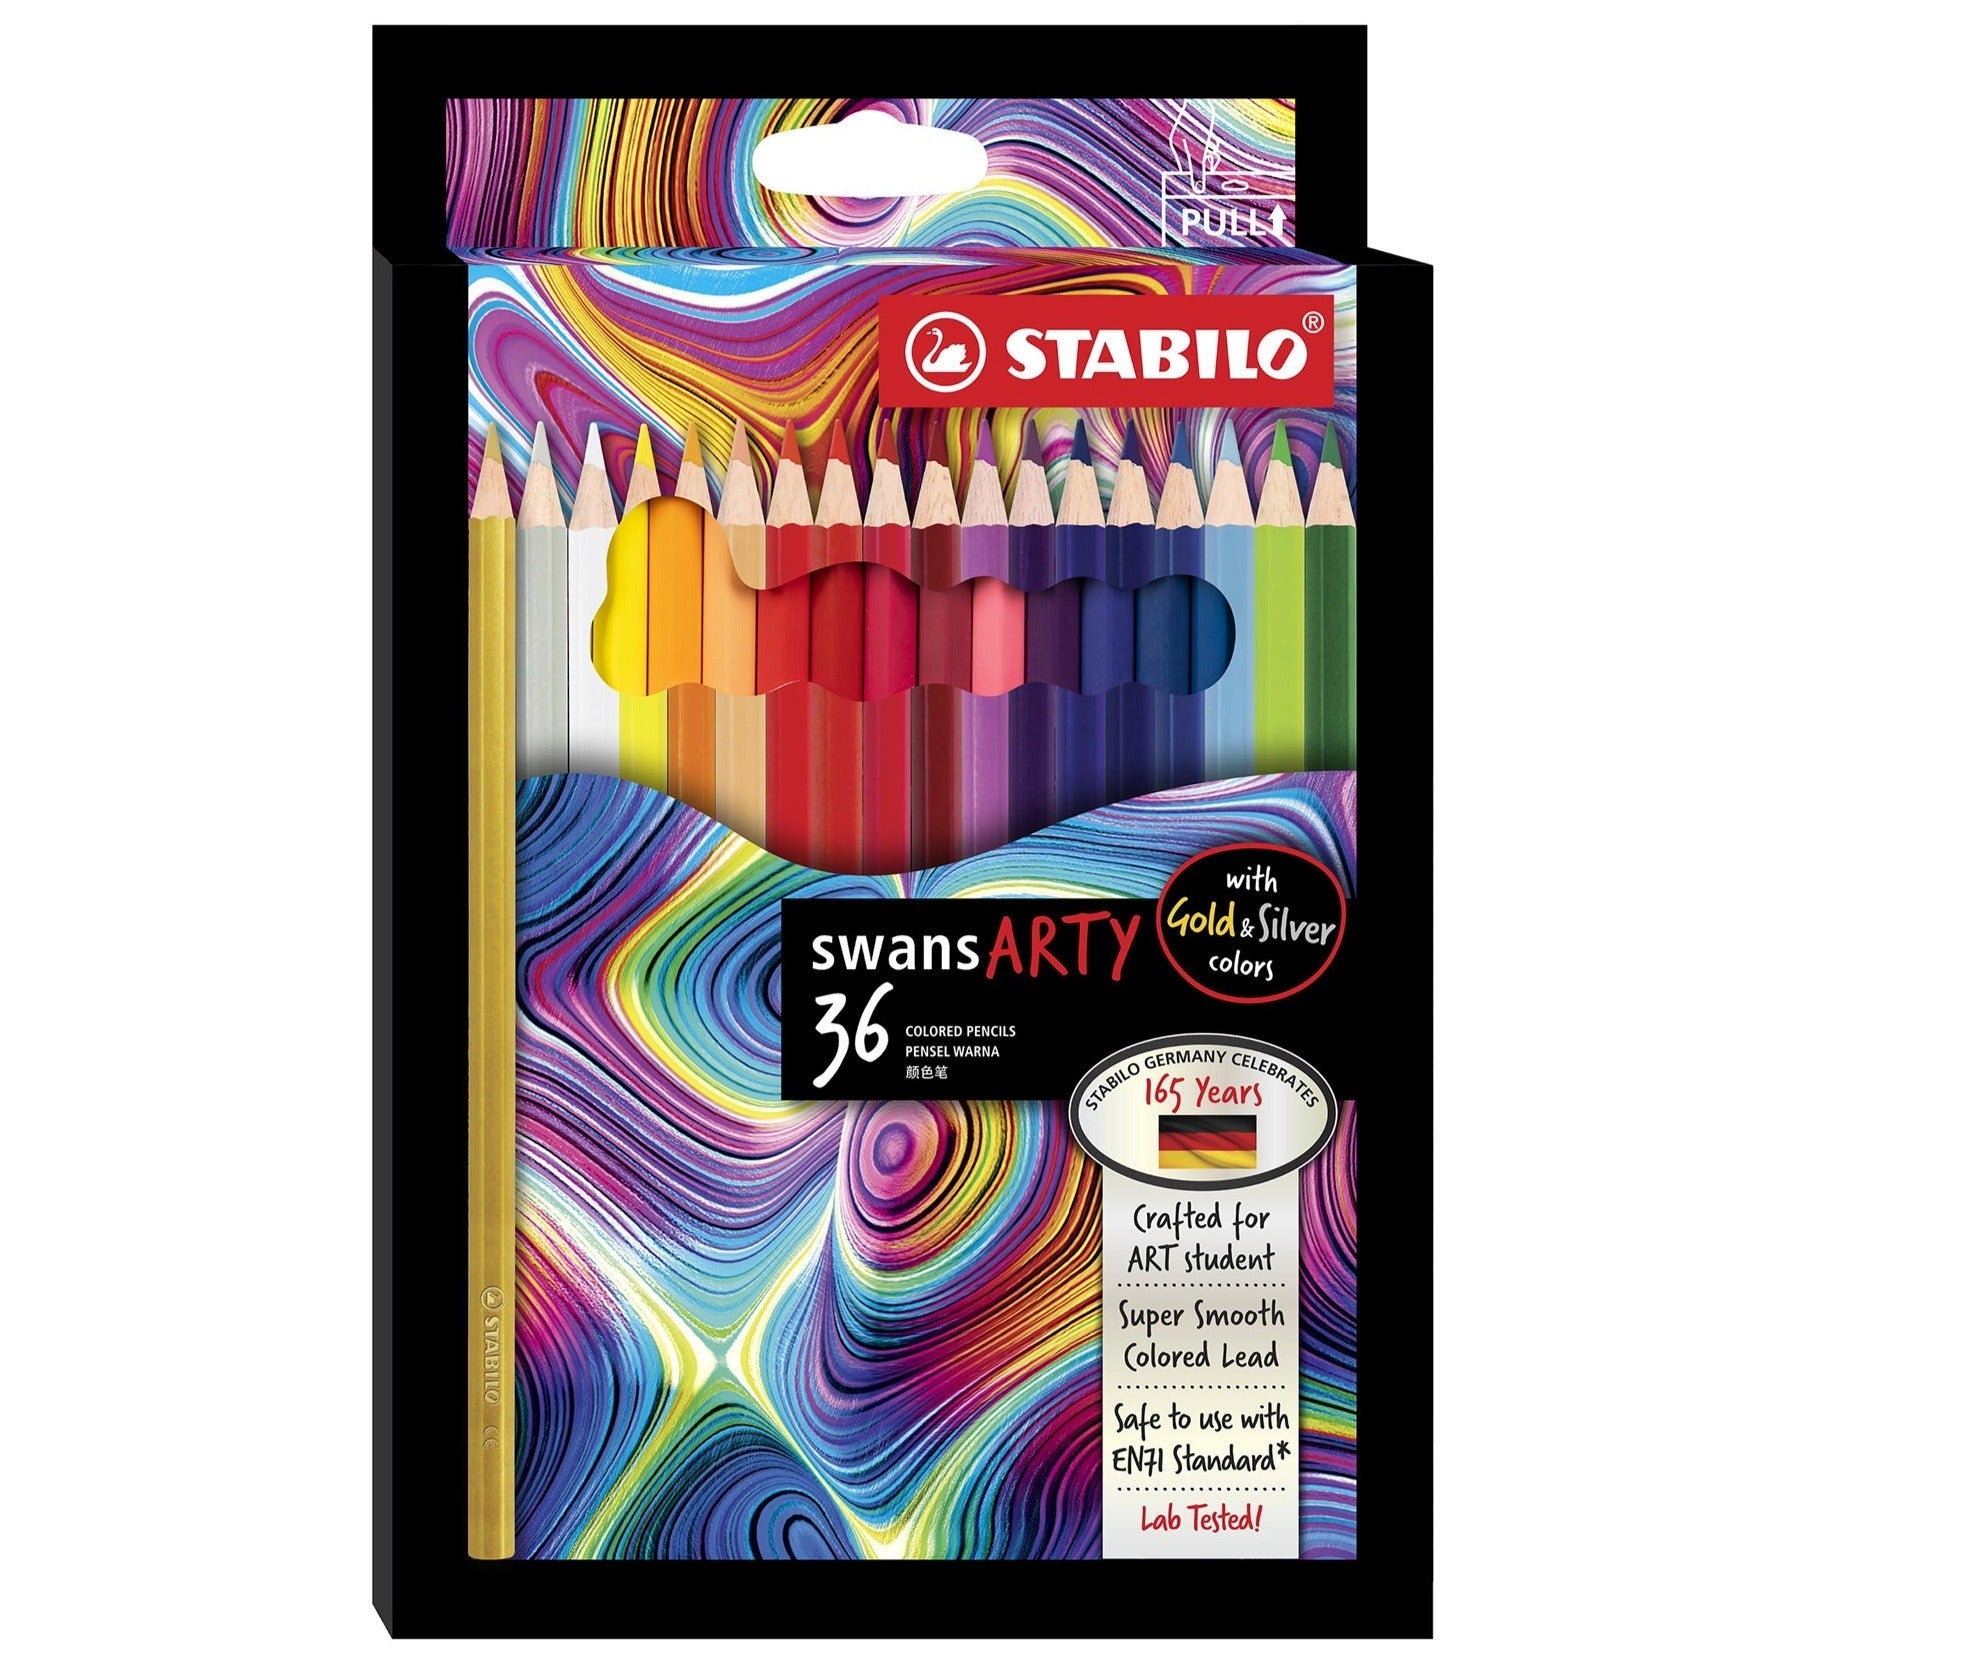 STABILO swans ARTY Coloured Pencils with Gold & Silver colors - Schwan-STABILO -Most colourful Stationery Shop